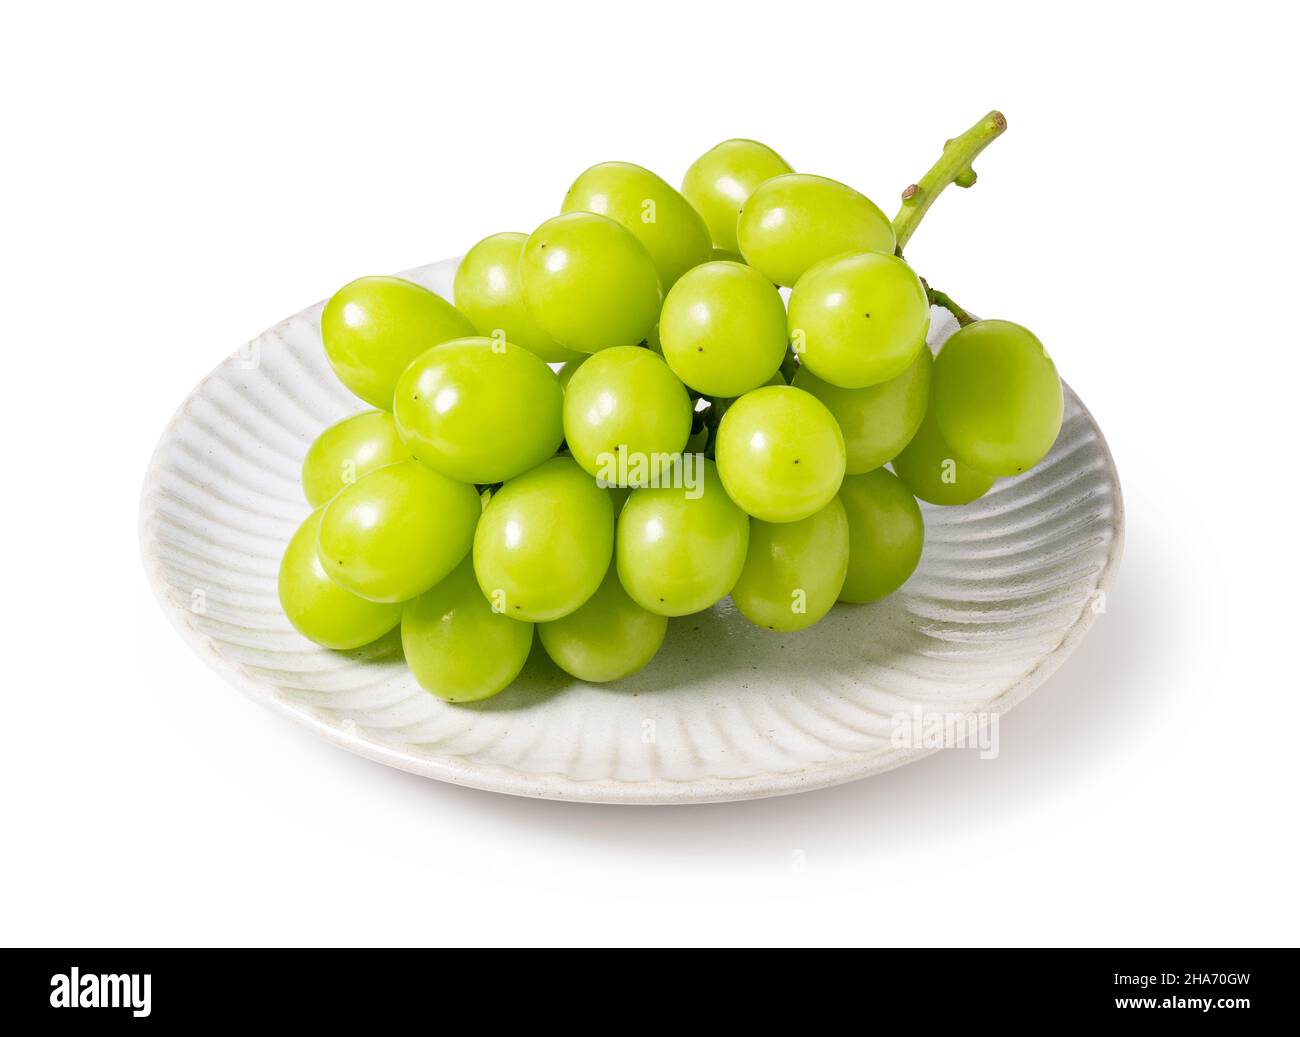 Bunch of Schein Muscat grapes on a plate set against a white background. White grapes. Japanese grapes. Stock Photo